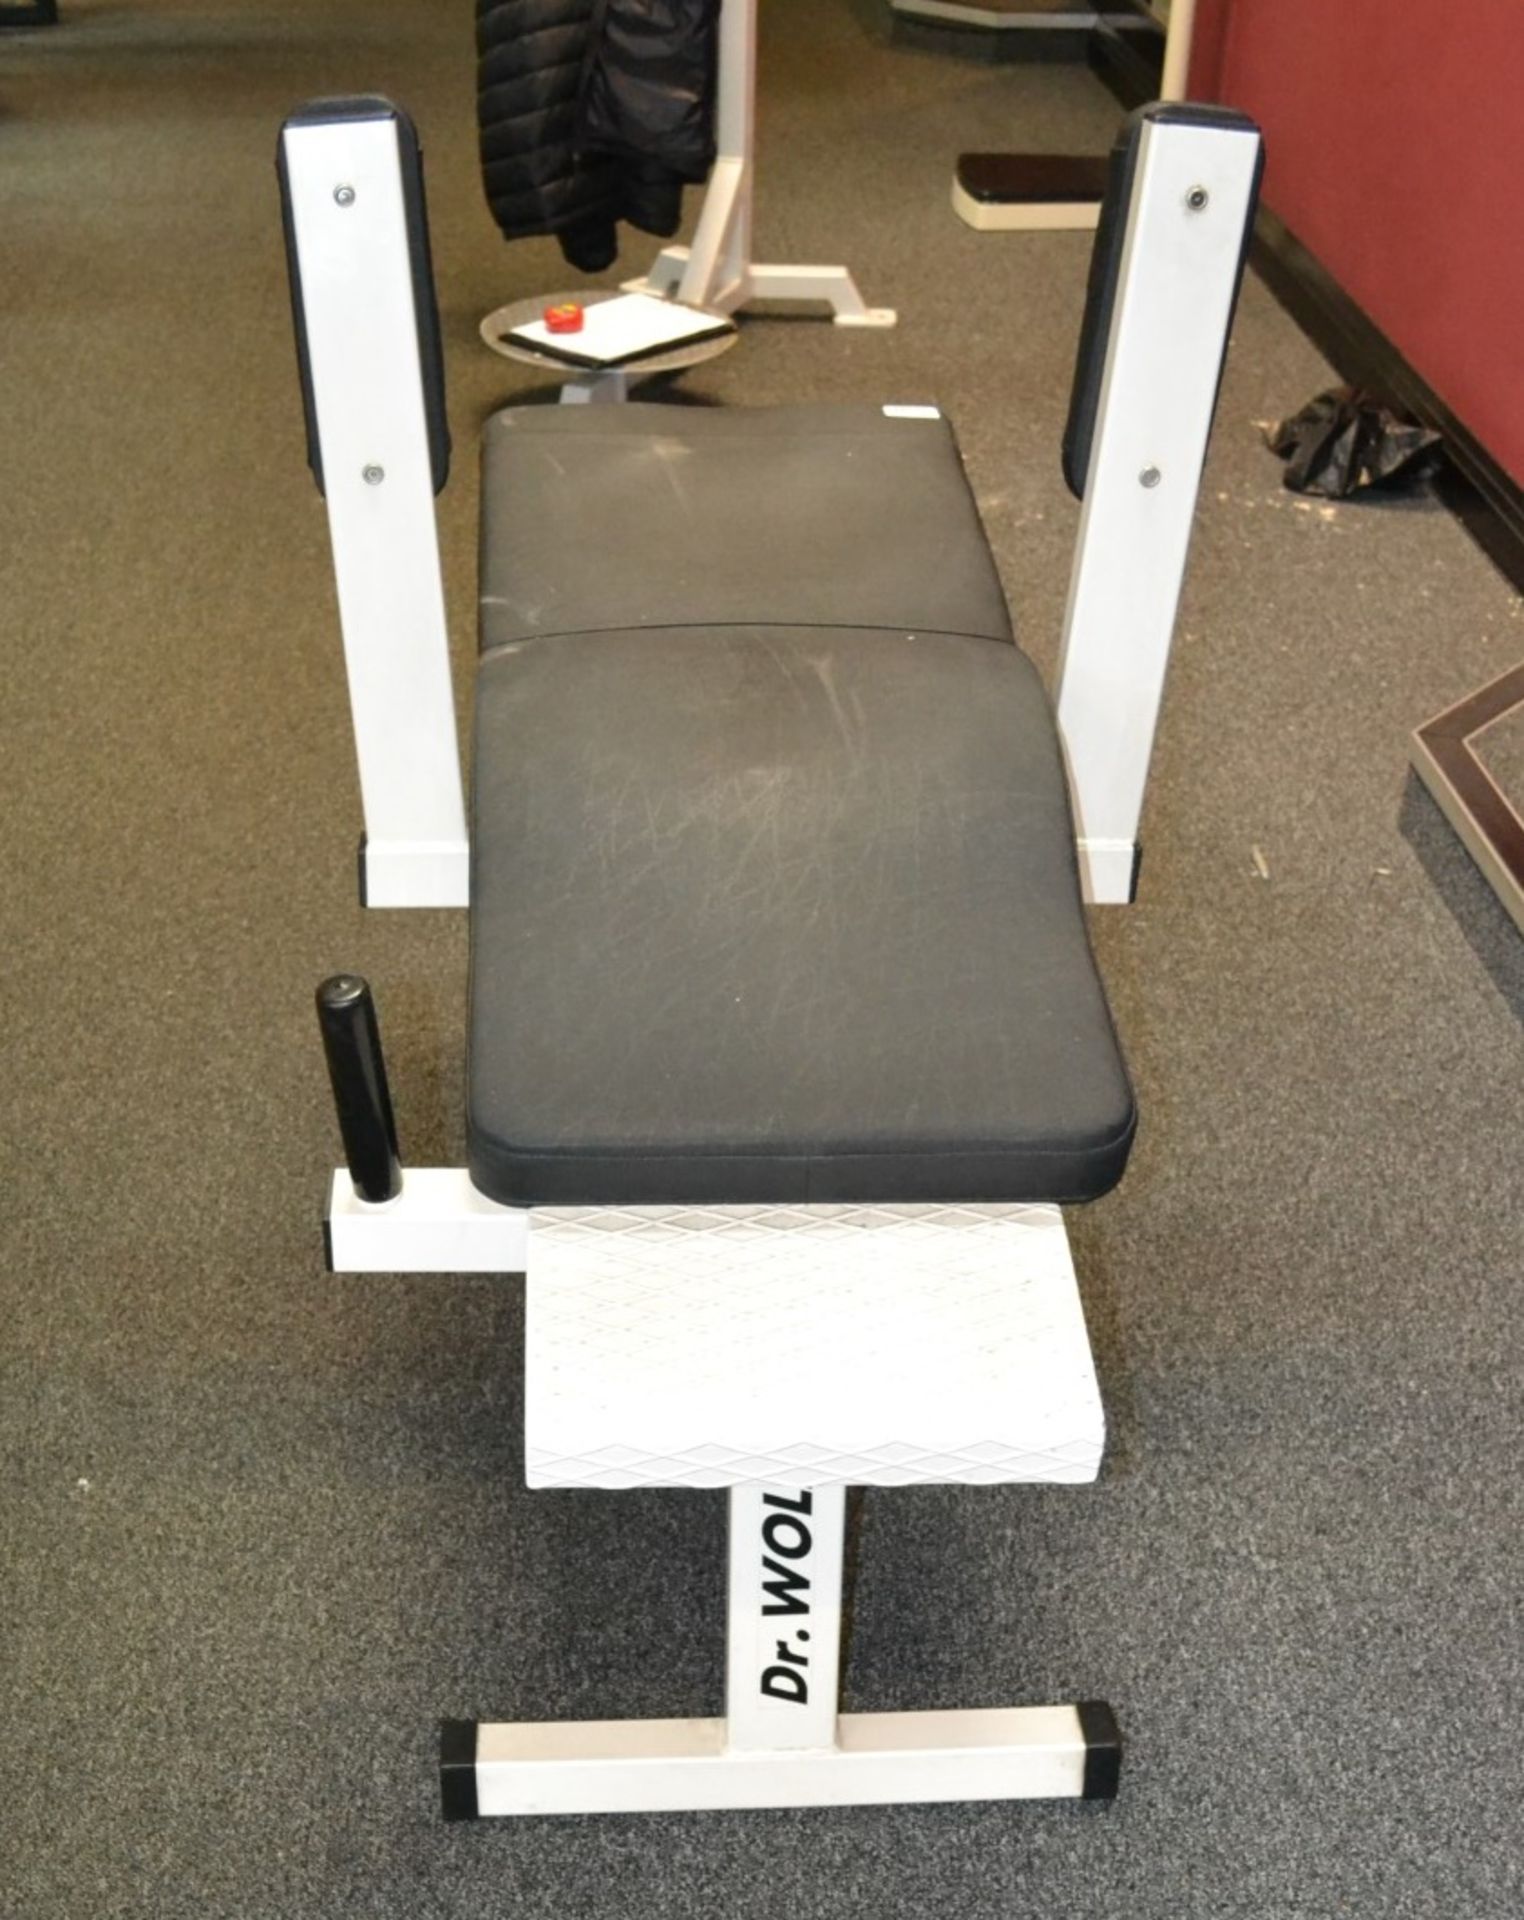 1 x Dr.Wolff Abdominal Fitness Bench - Dimensions: L140 x H100 x W50cm - Ref: J2070/1FG - CL356 - - Image 2 of 3